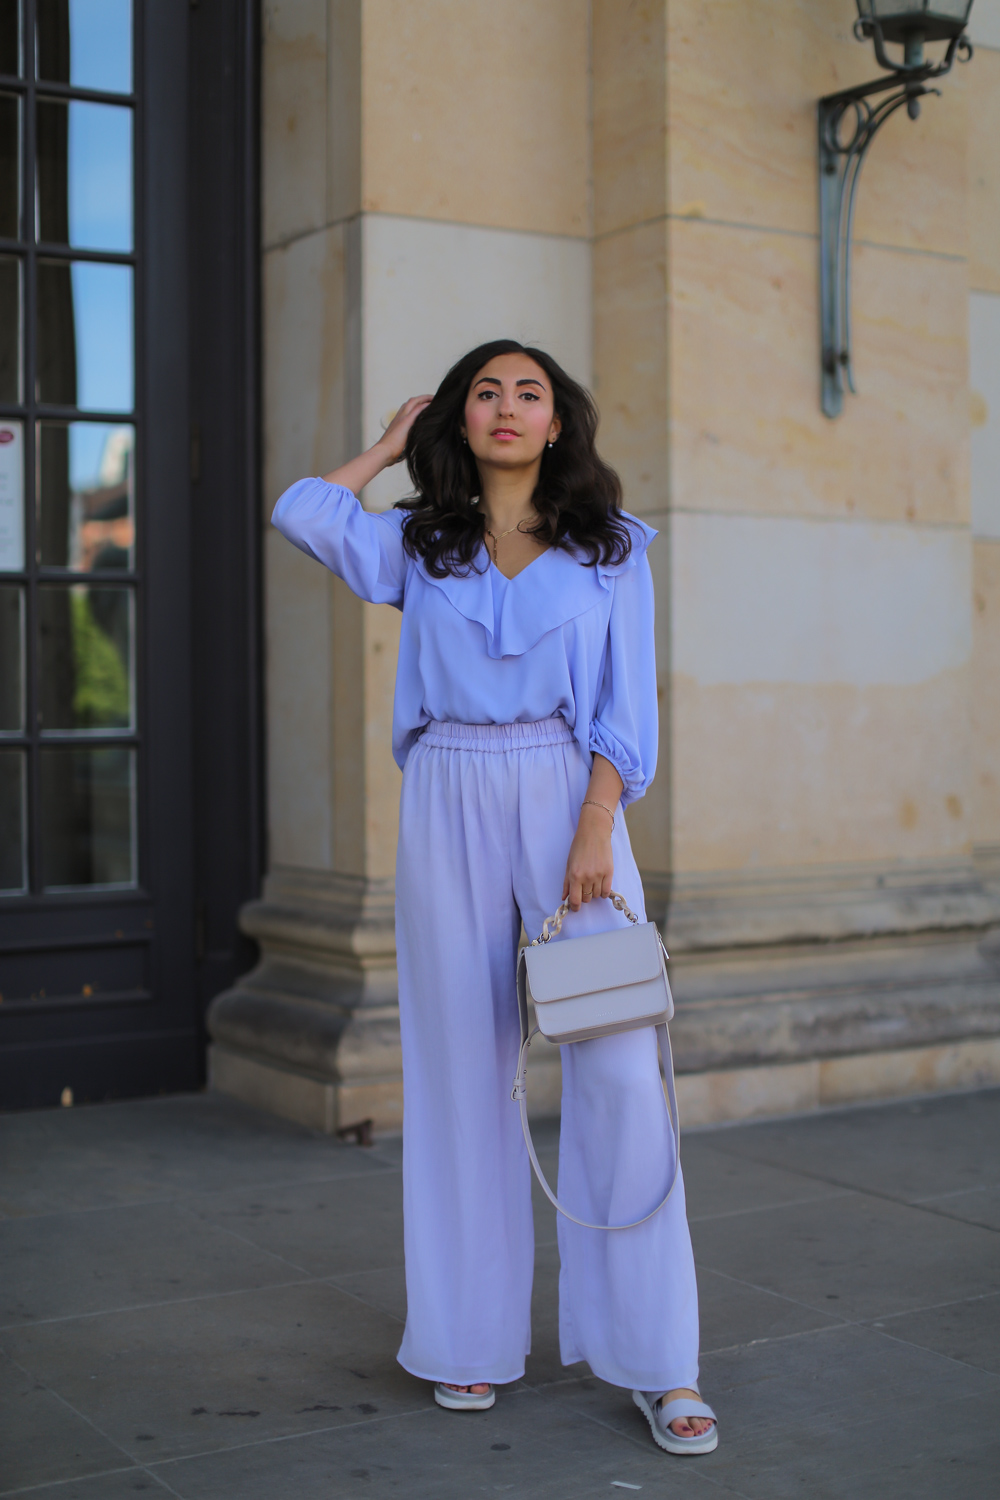 all lilac outfit palazzo pants styling lavender cai jewellery schmuck pearly ear cuff summer style 2020 berlin samieze